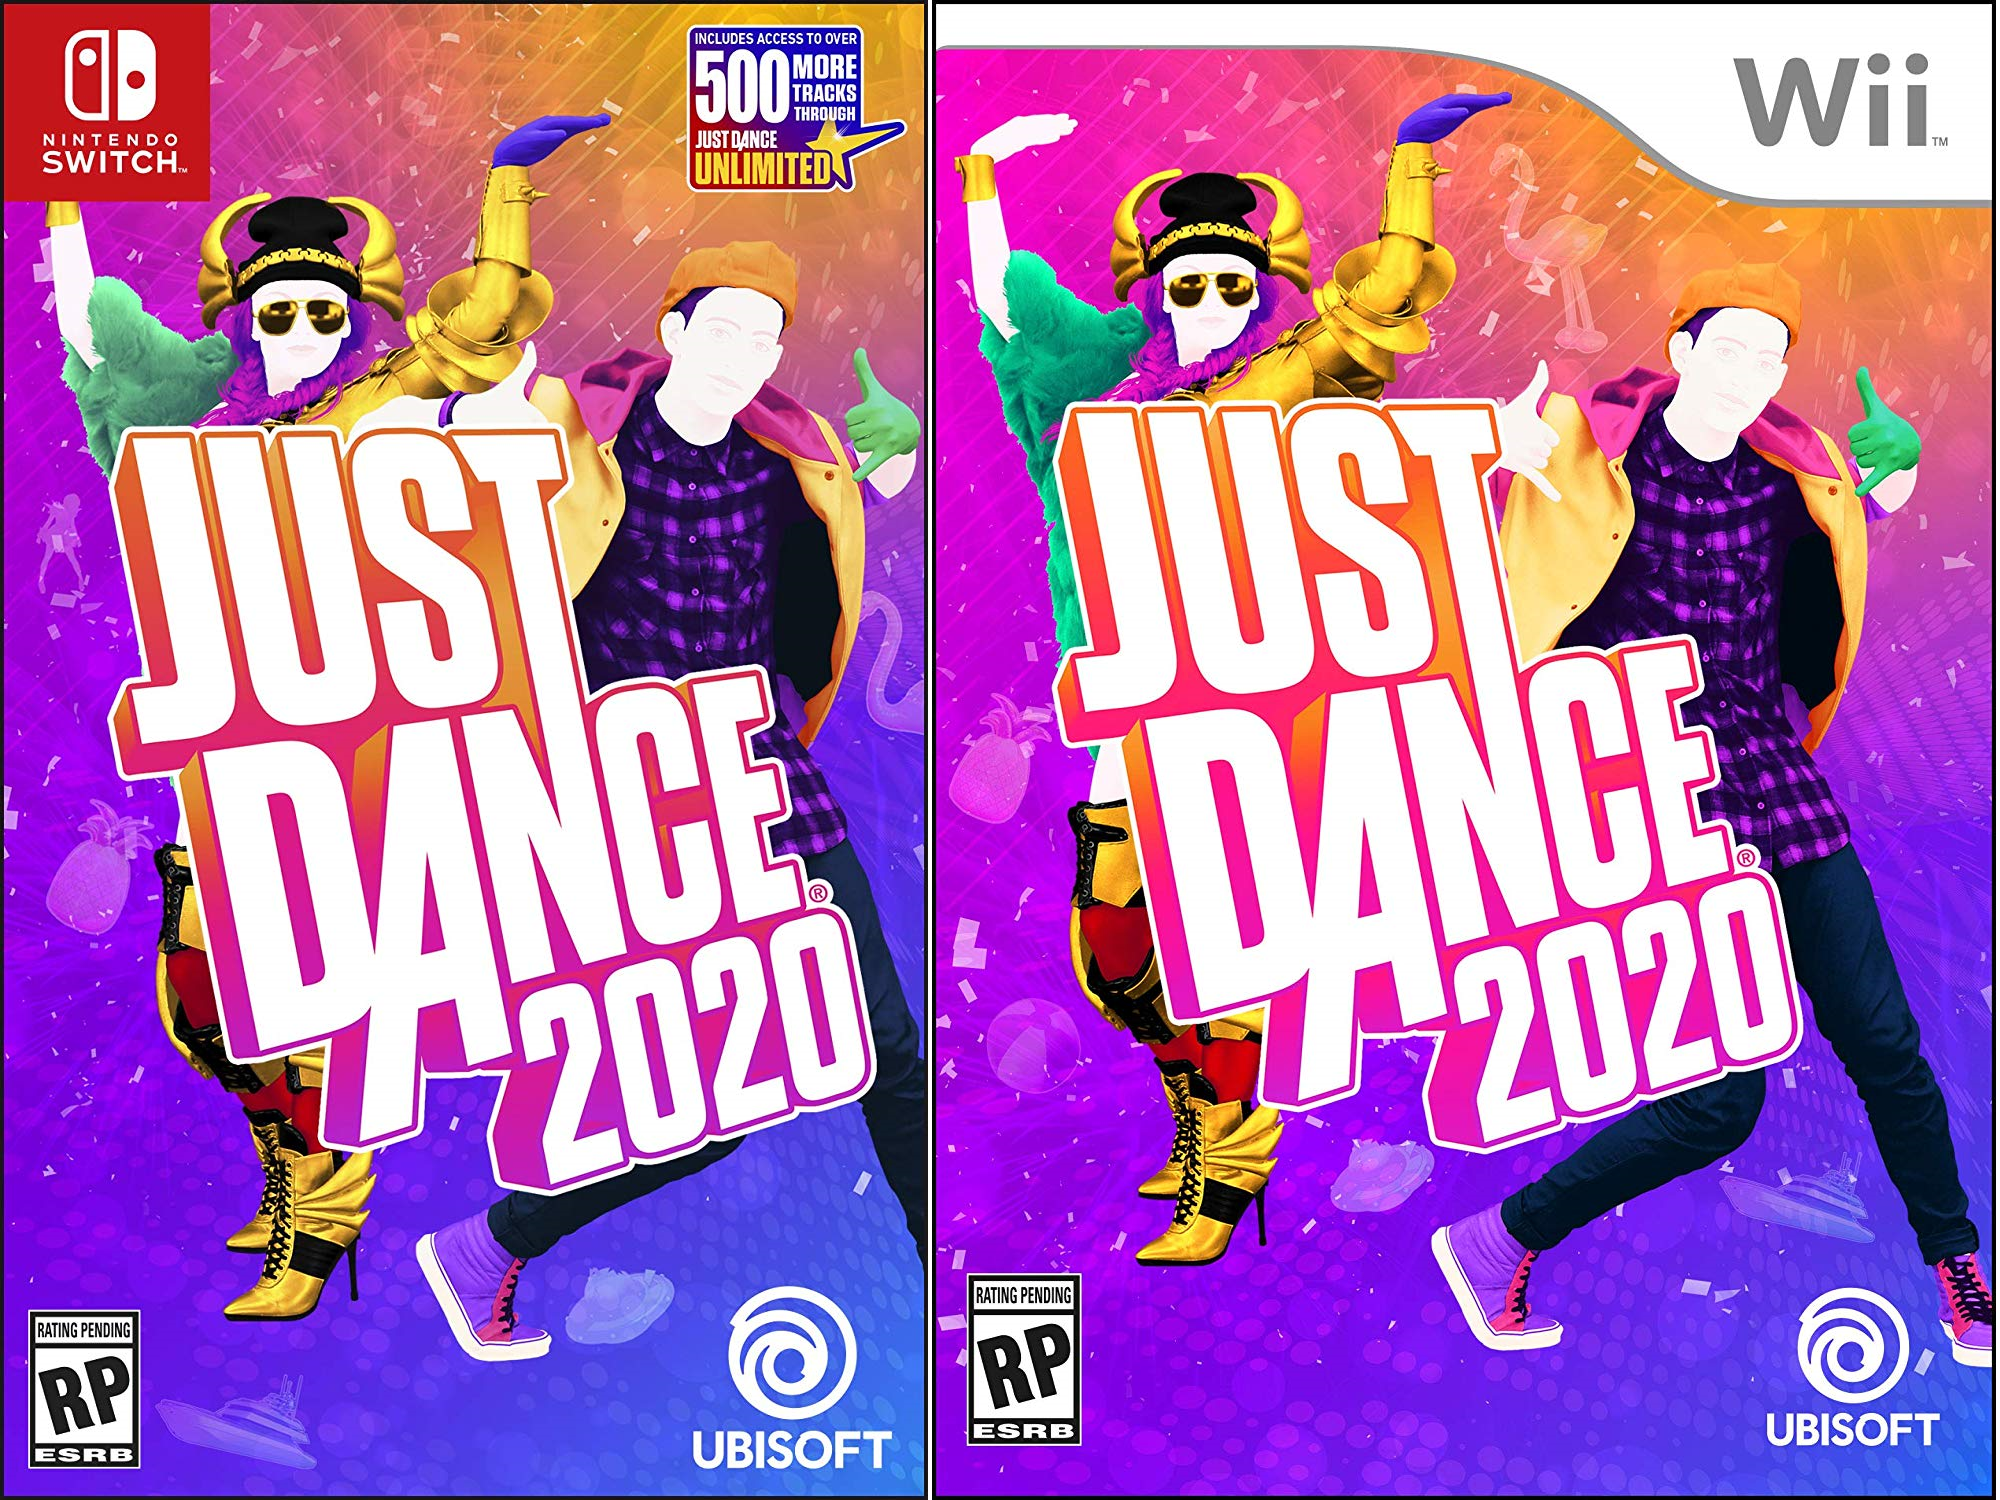 wii switch just dance 2020